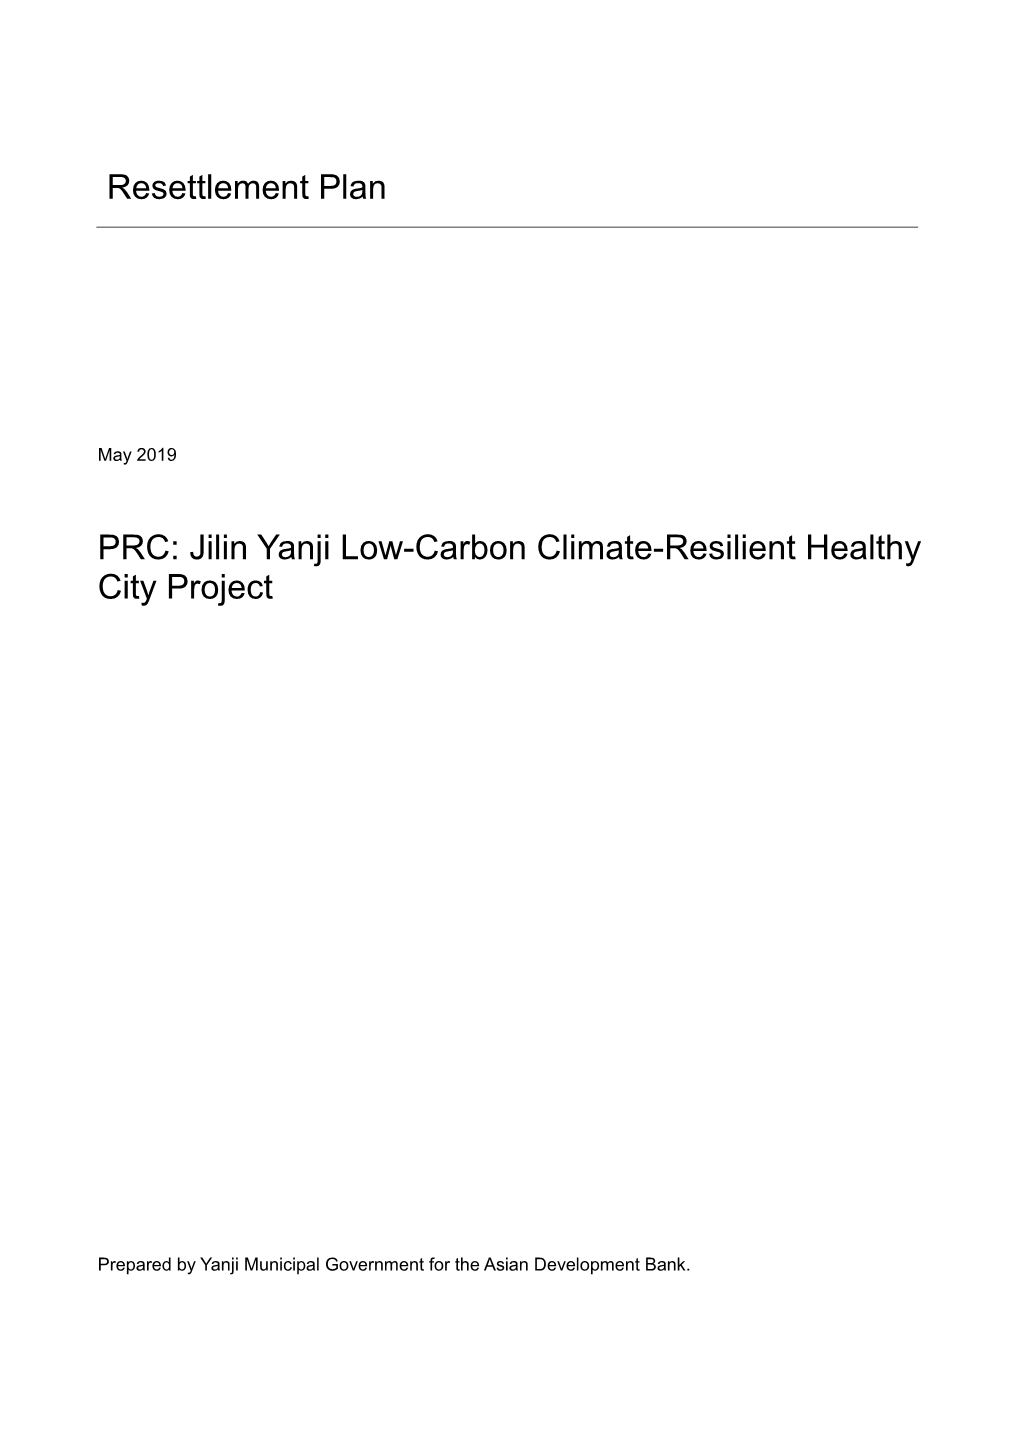 50322-002: Jilin Yanji Low-Carbon Climate-Resilient Healthy City Project